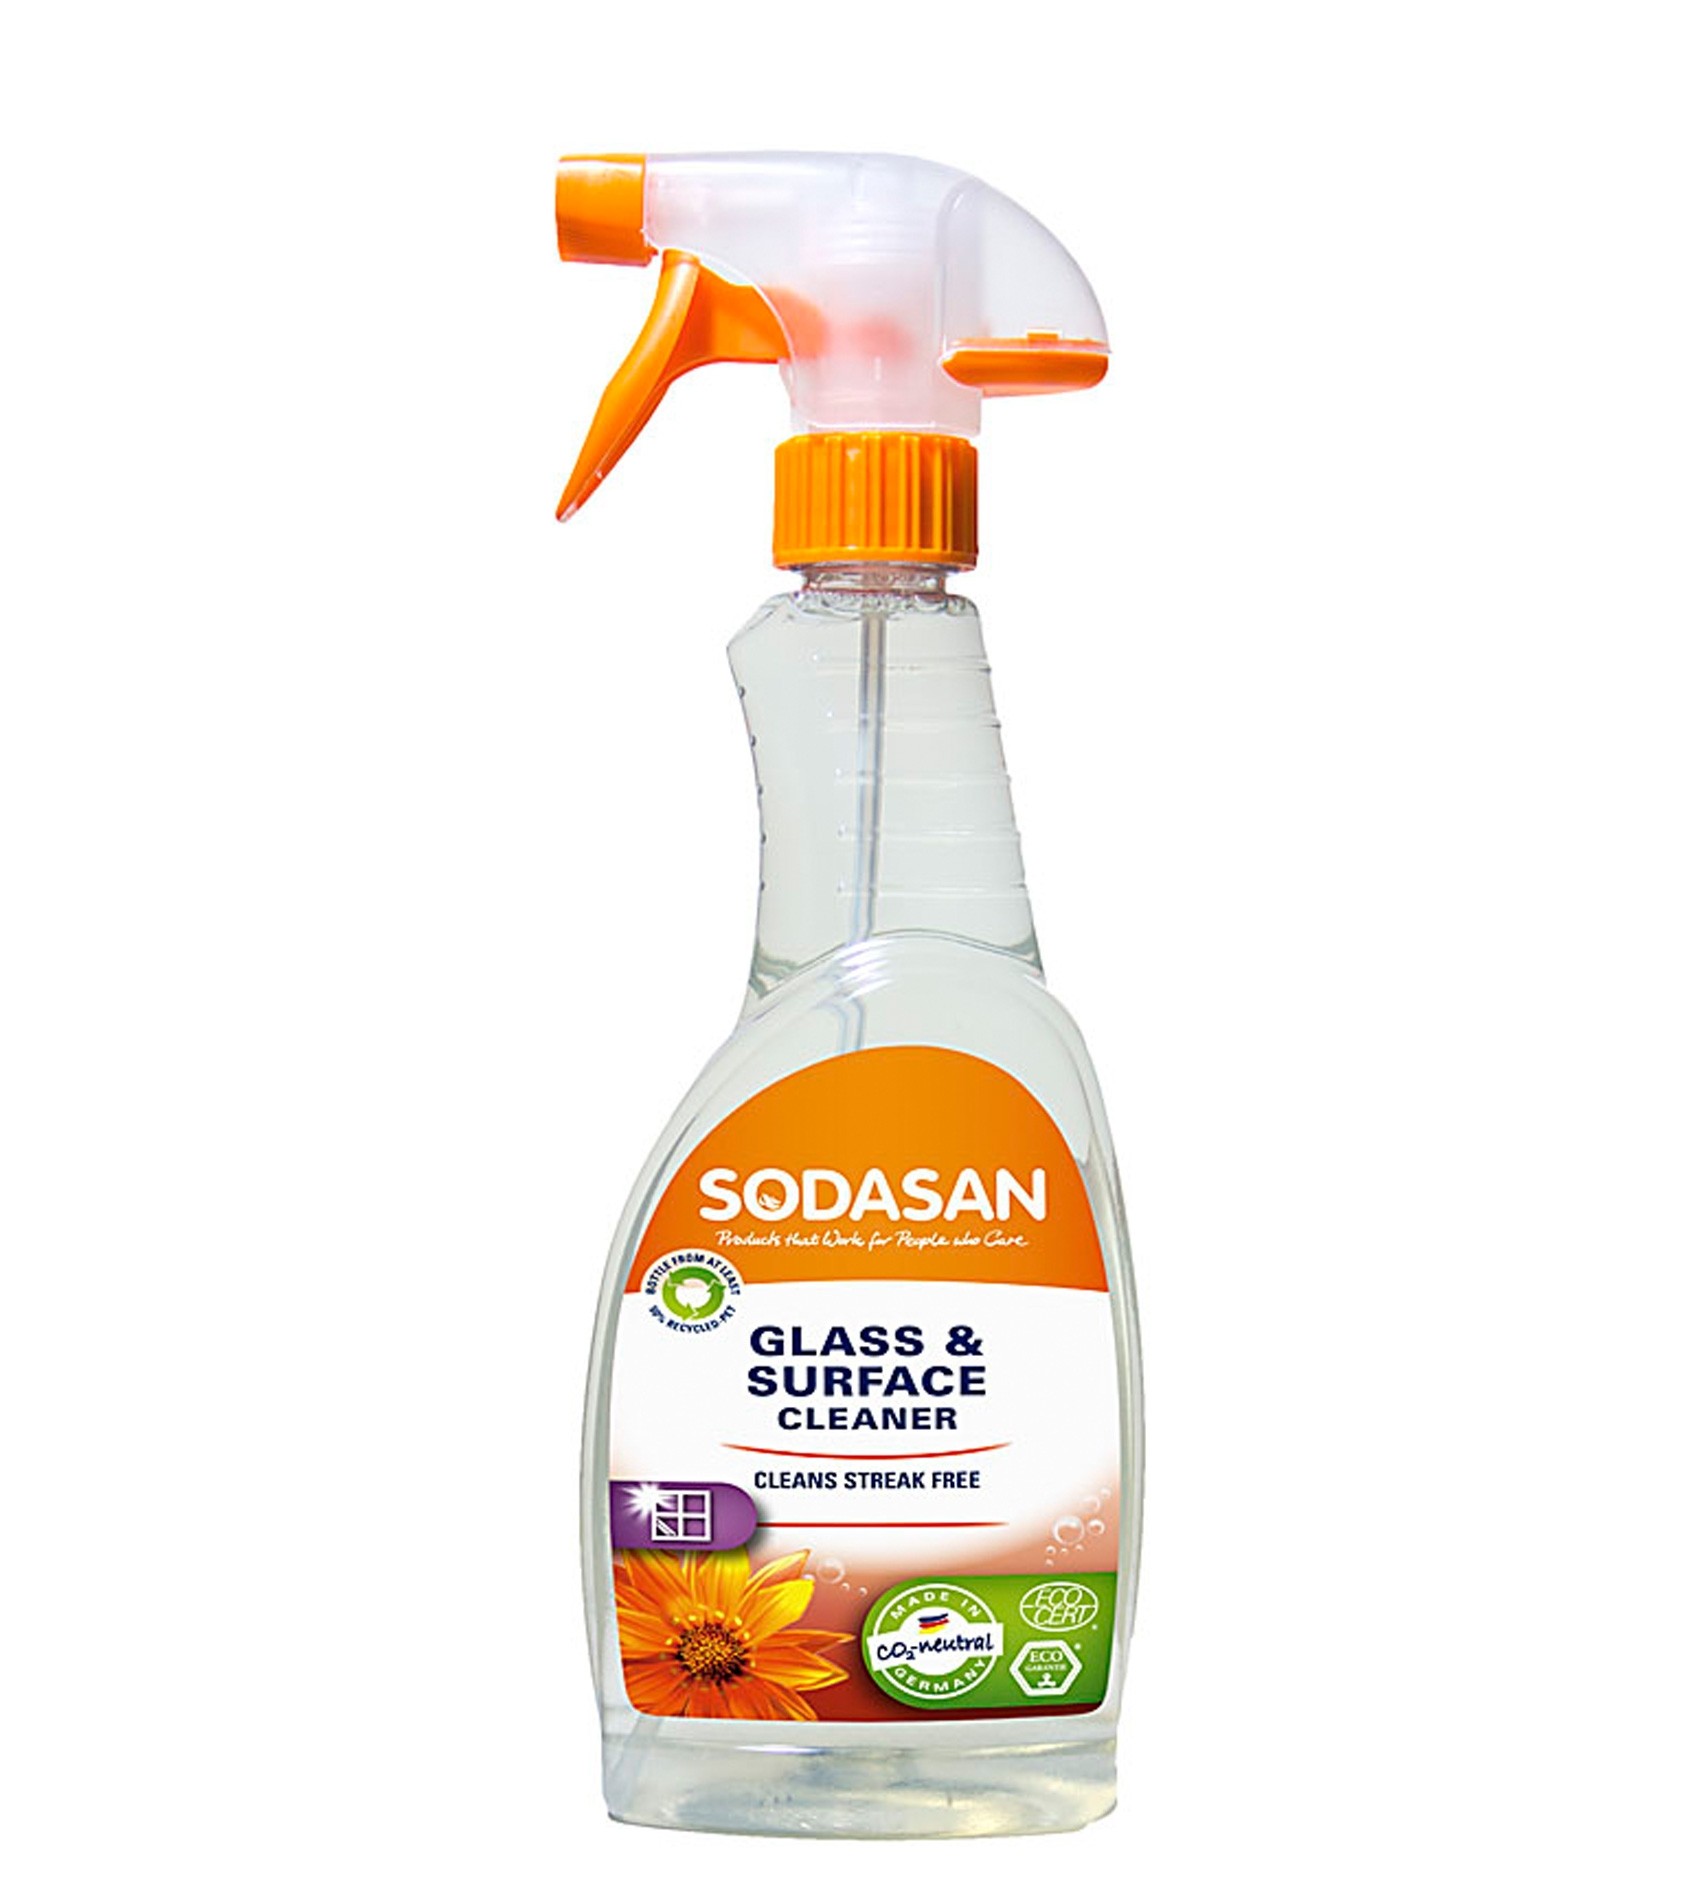 Sodasan Glass and Surface Cleaner